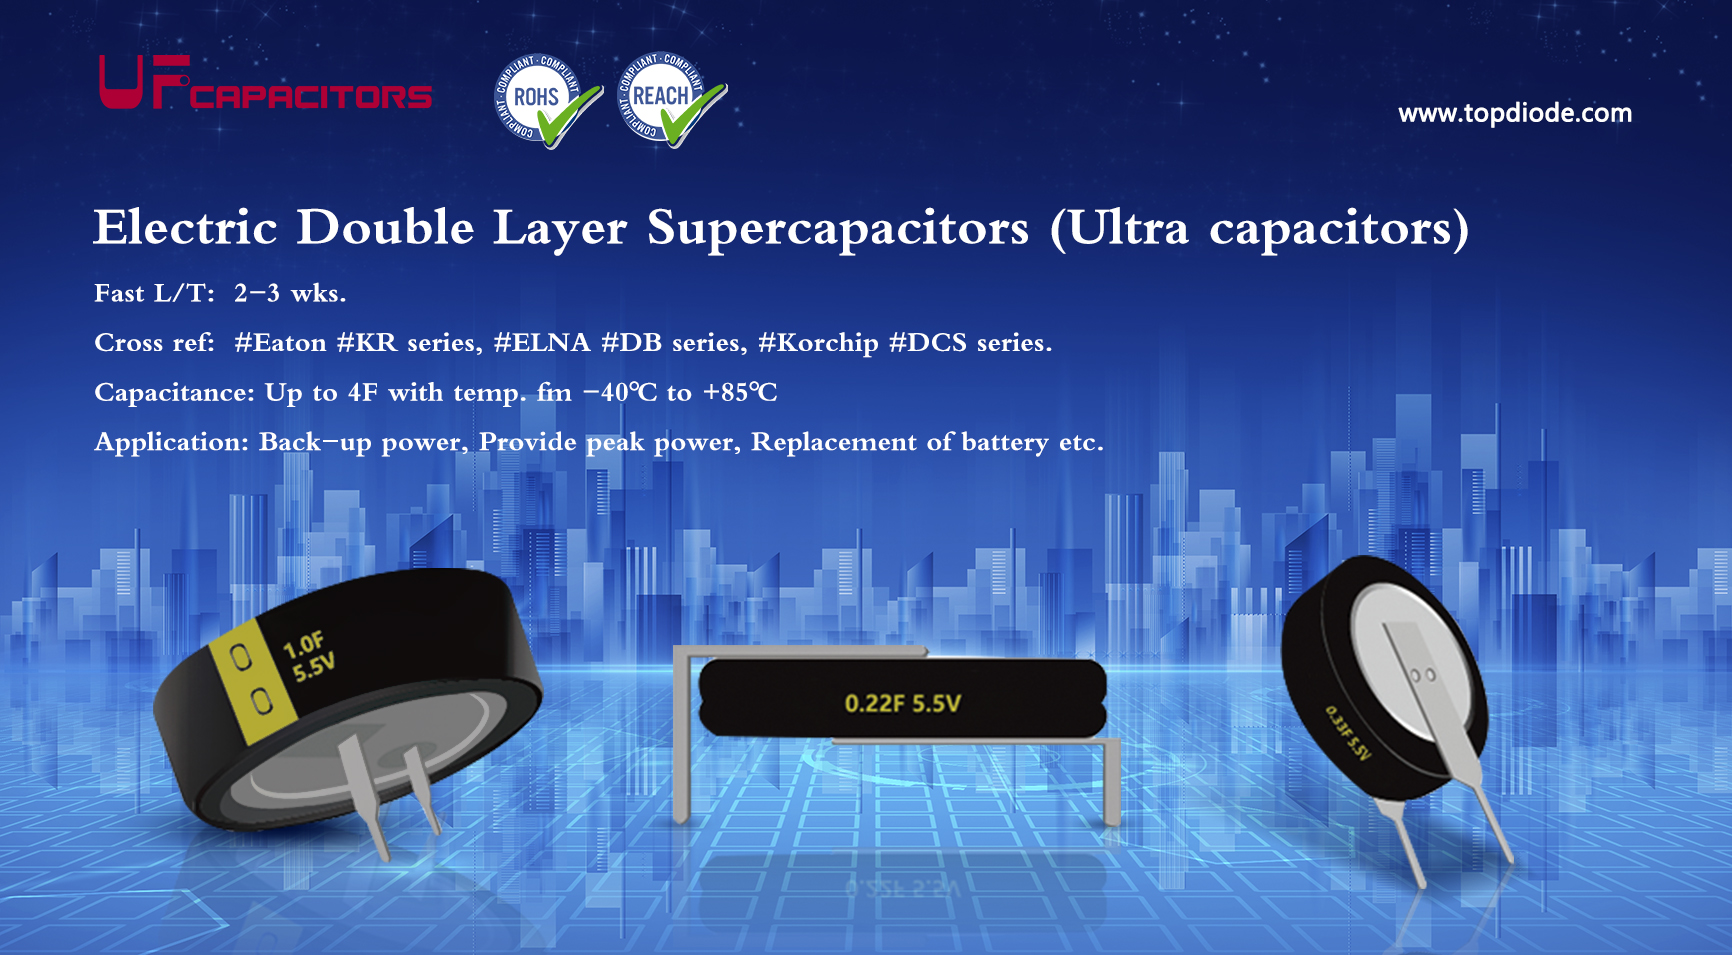 WHAT IS #SUPERCAPACITOR #ULTRACAPACIT #FARADCAPACITOR?